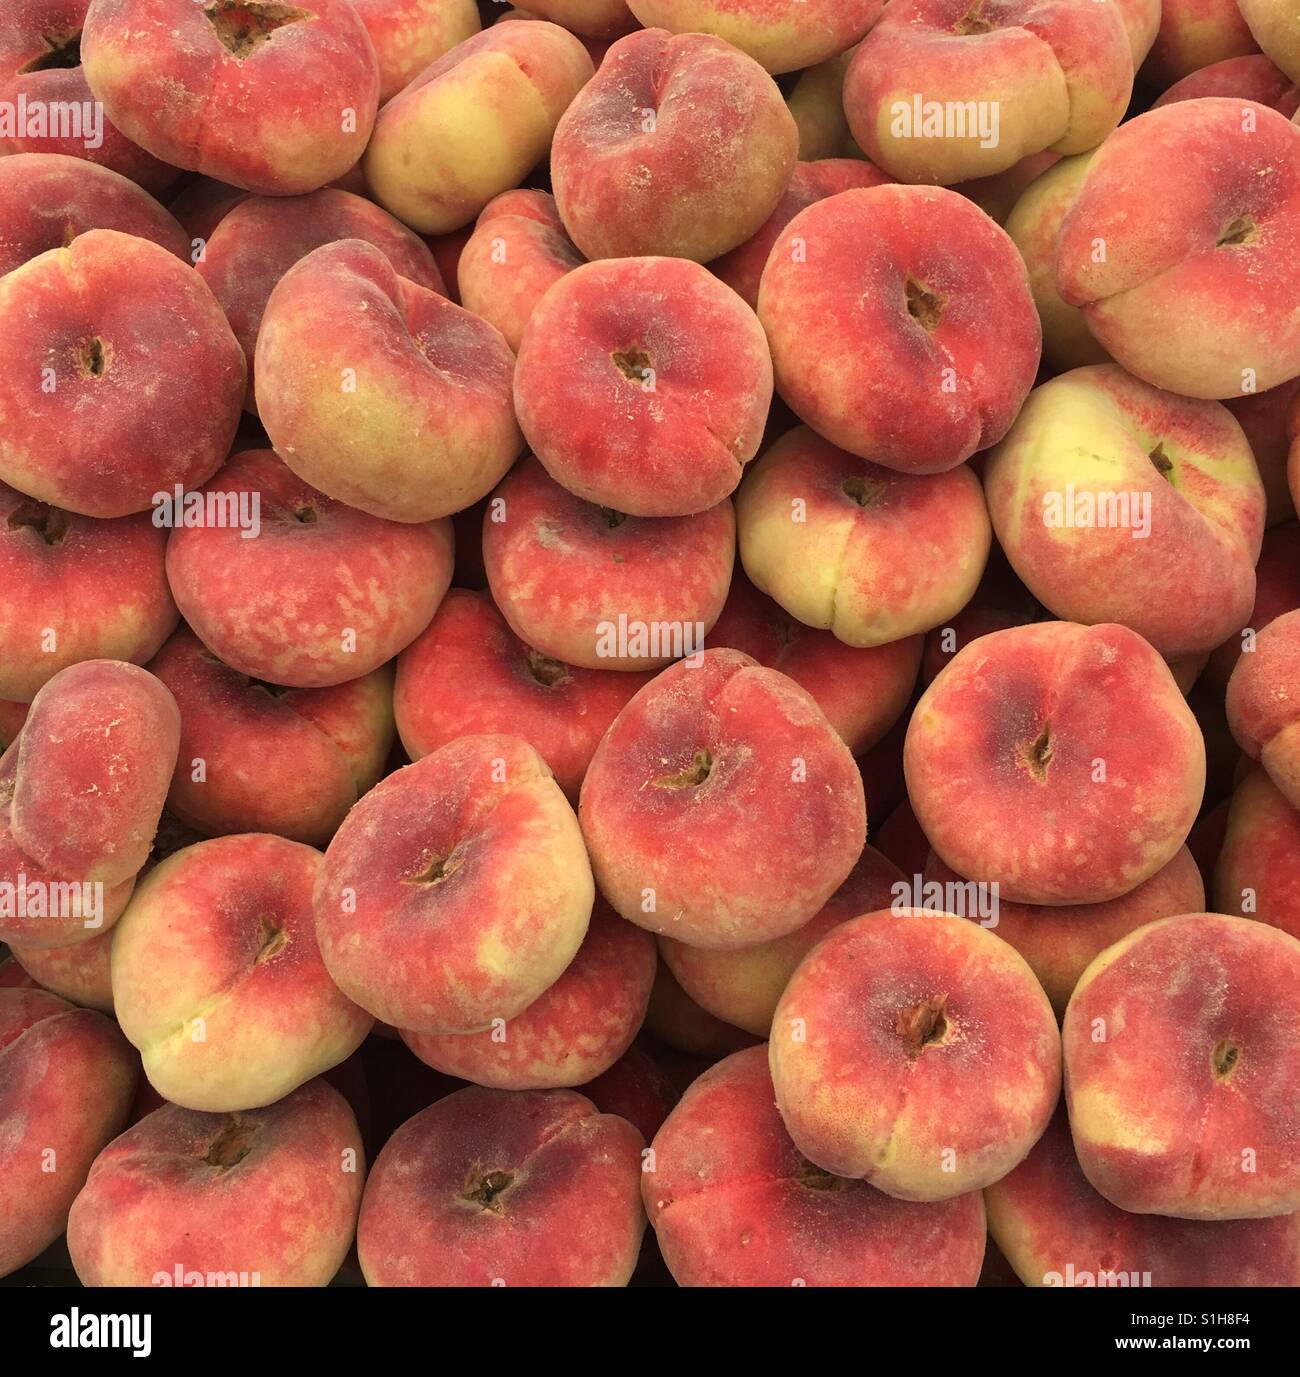 Nectarines on sale at a market in Mallorca Stock Photo